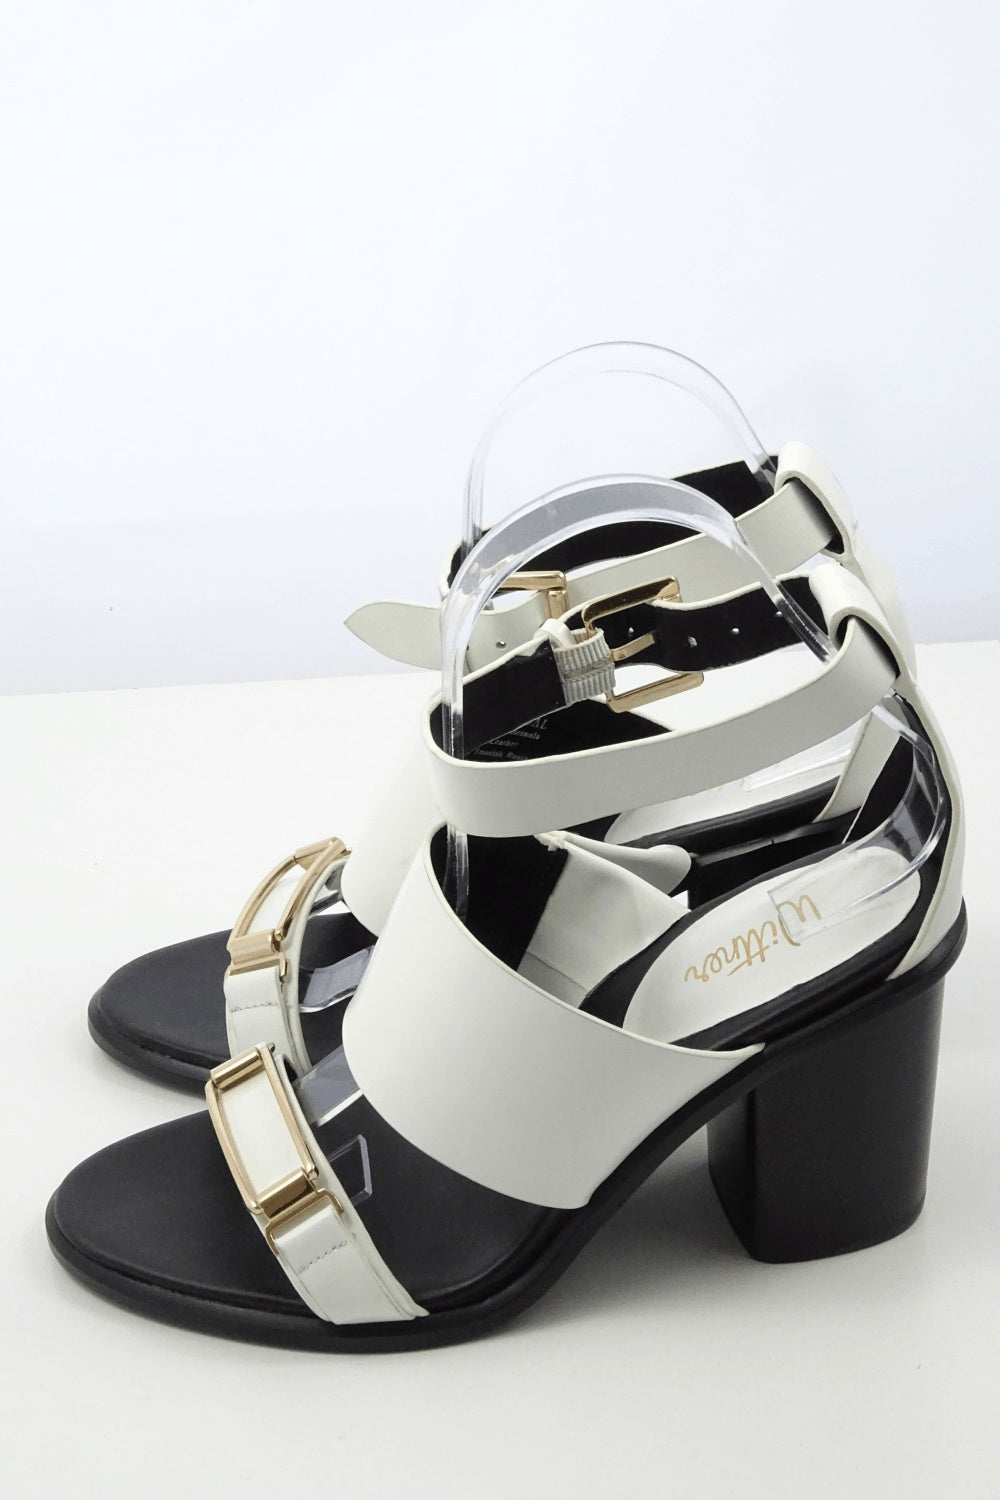 Black and white sandals with gold buckle detail. New without tags.